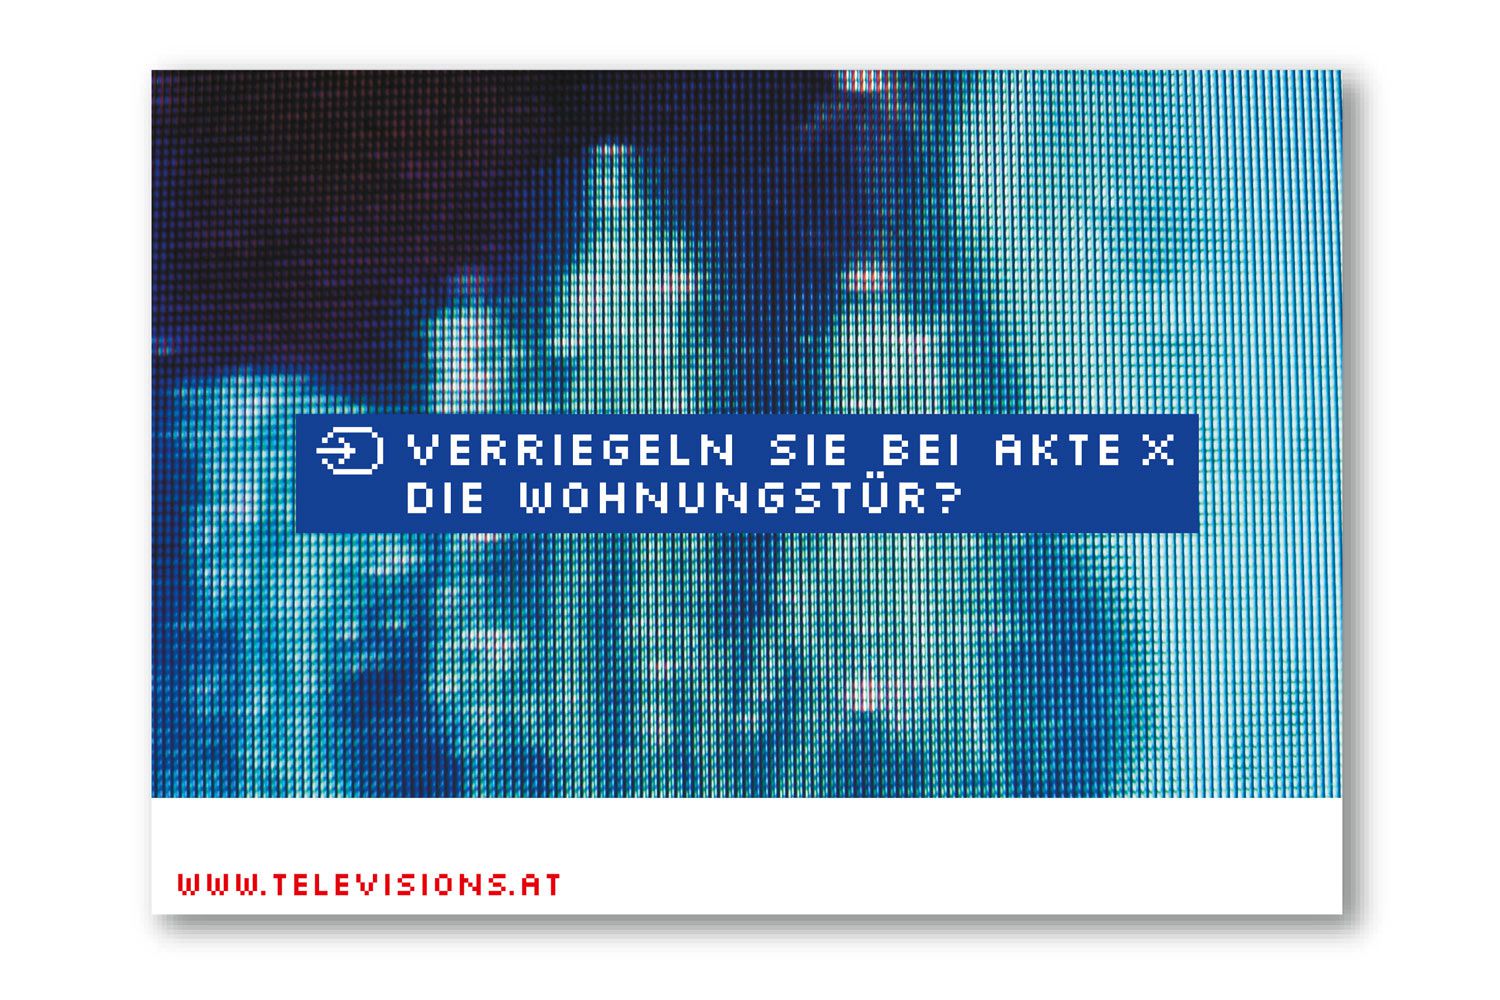 TeleVisions Flyer Akte X